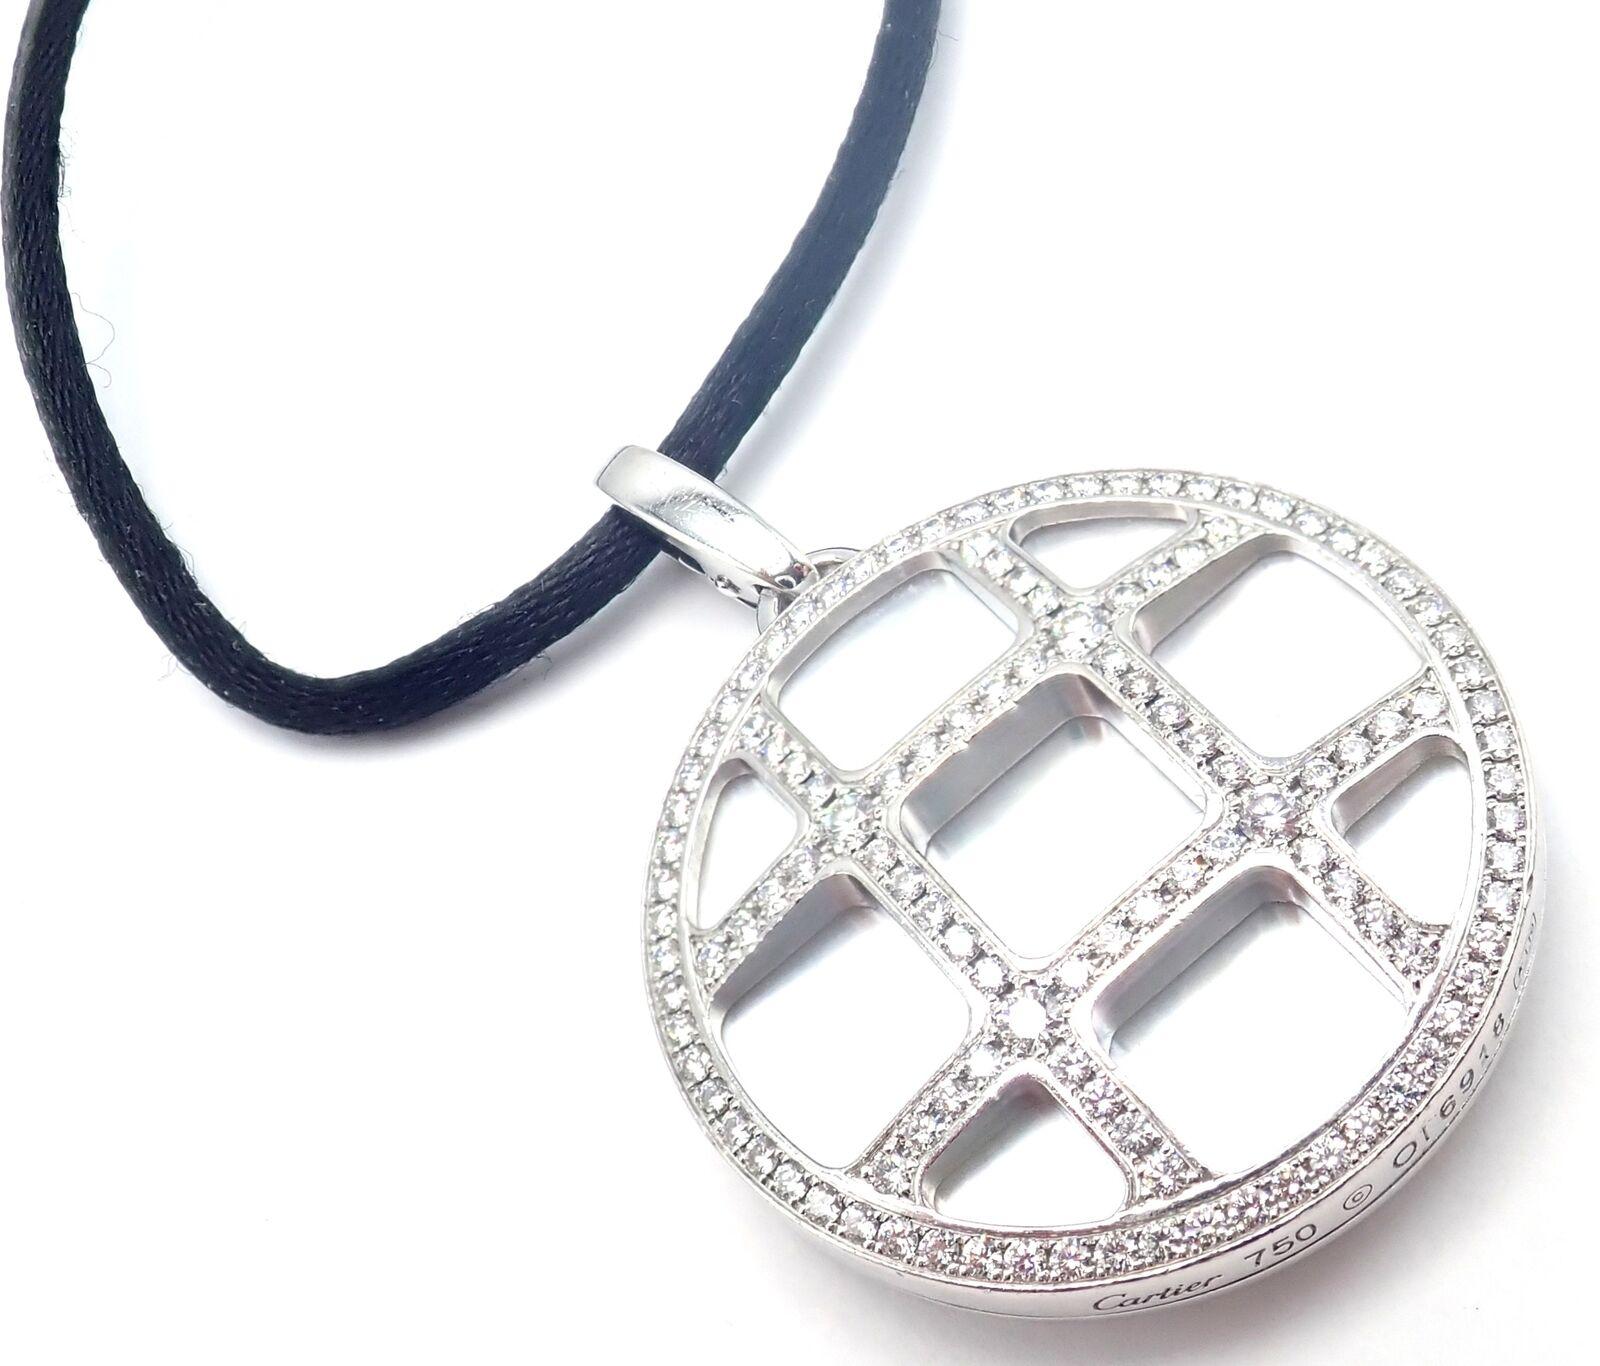 18k White Gold Pasha De Cartier Diamond And Mother Of Pearl Pendant on a Silk Cord Necklace by Cartier. 
With Round brilliant cut diamonds, VS1 clarity, G color. Total weight: 2.20ct. 
This beautiful necklace comes with Cartier box. 
Details: